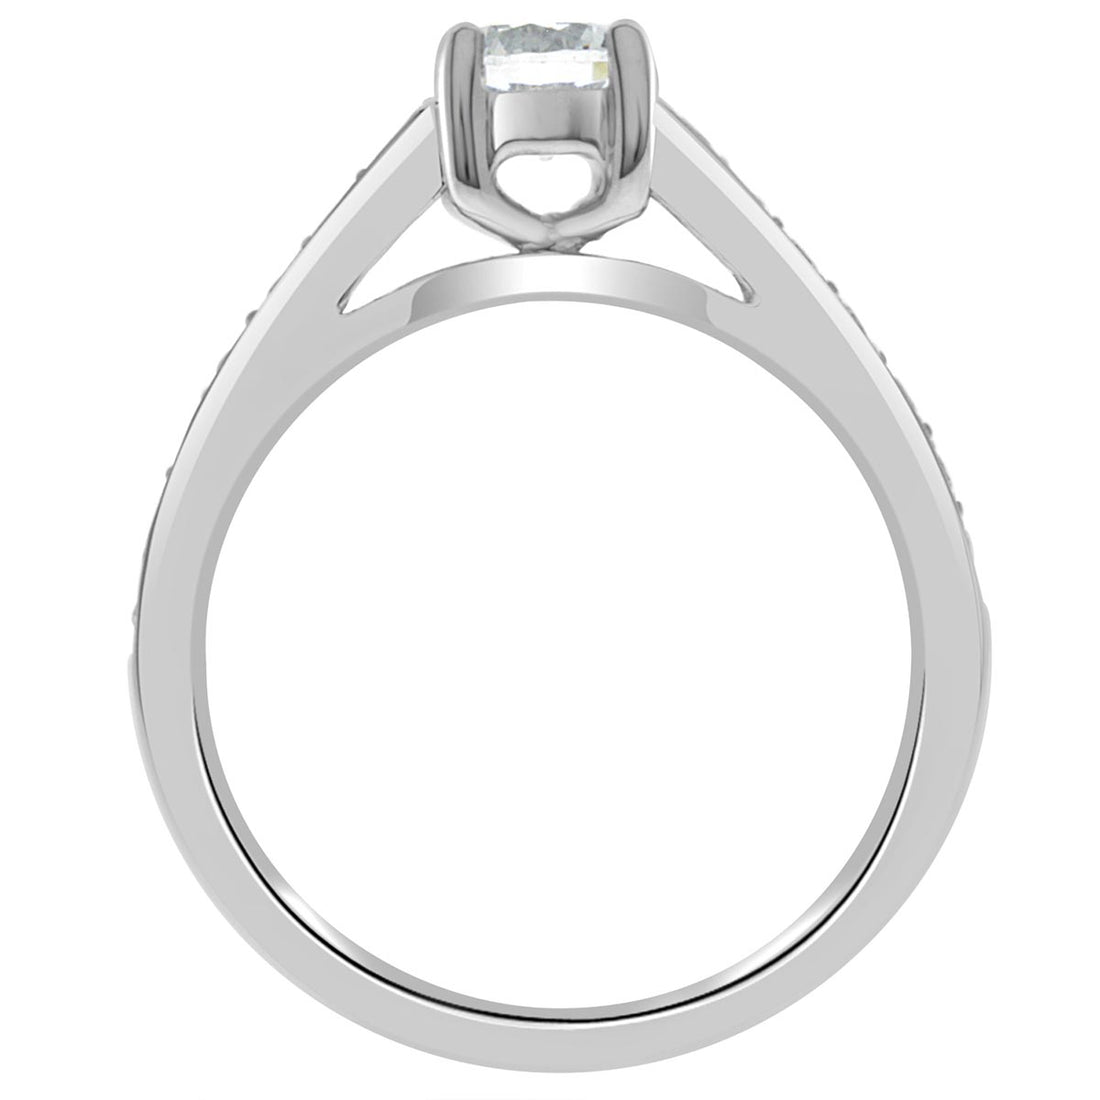 Pavé Diamond Ring manufactured in white gold standing upright